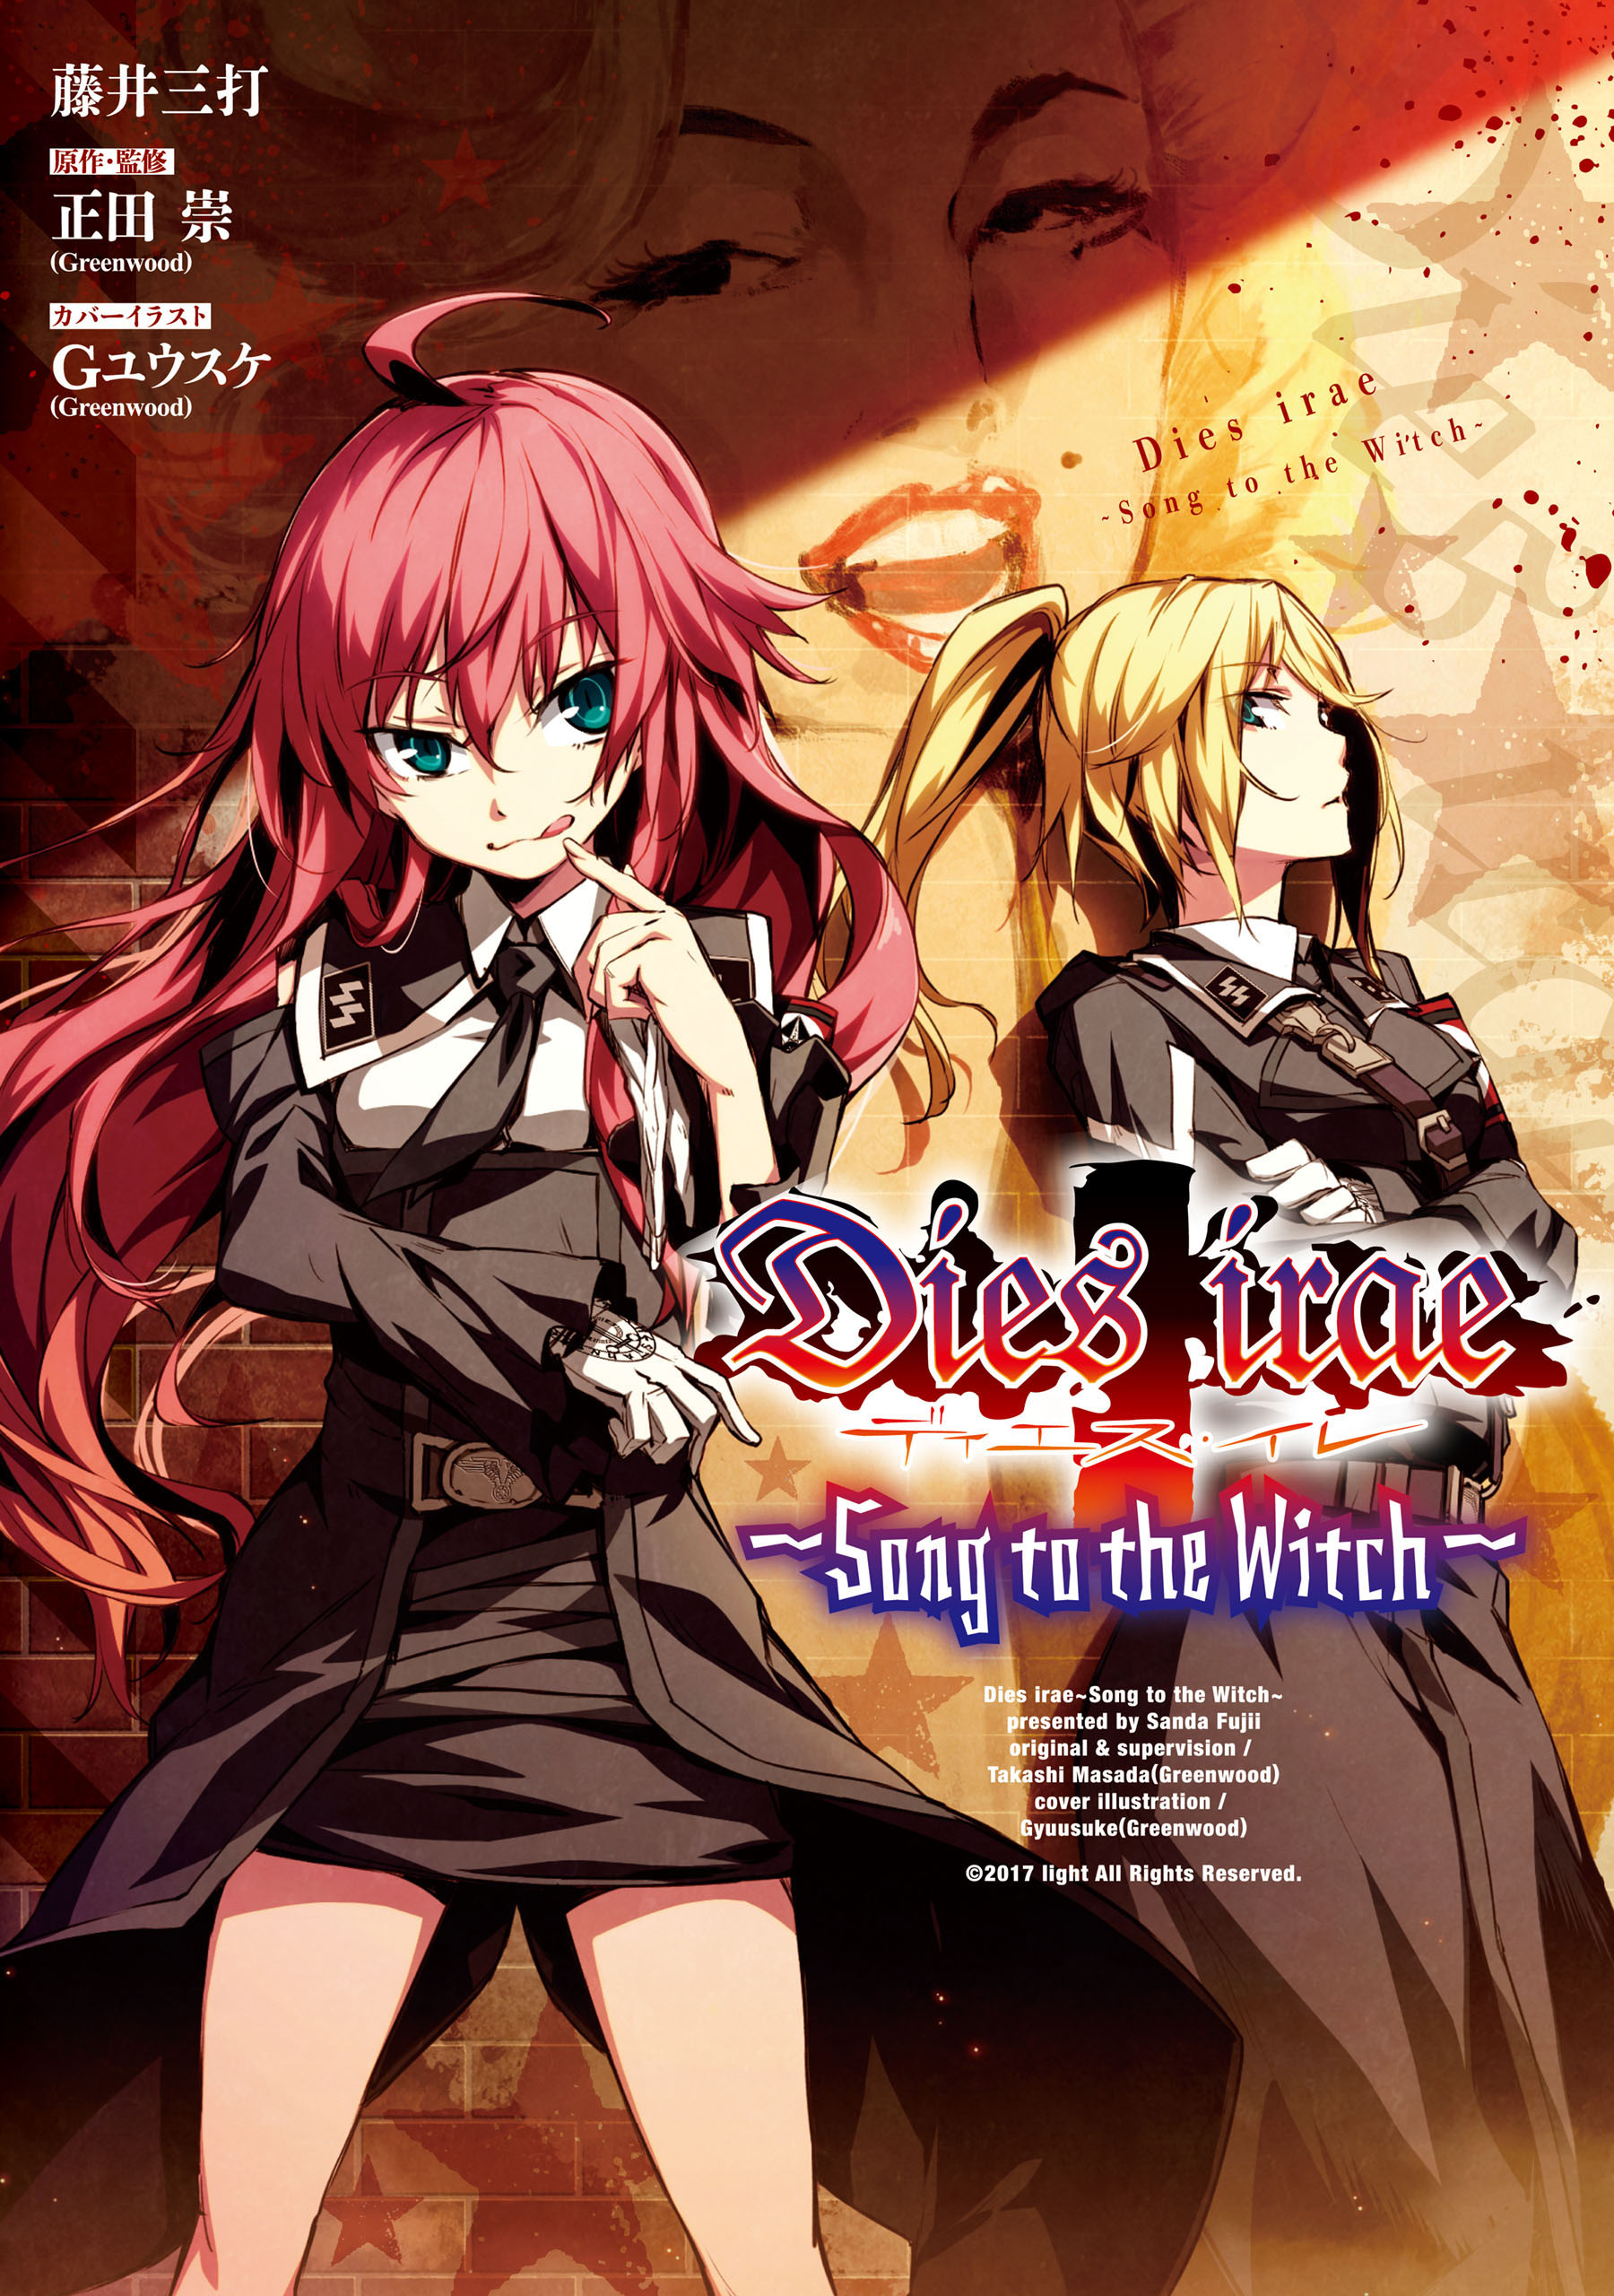 Dies Irae Song To The Witch 漫画 無料試し読みなら 電子書籍ストア ブックライブ